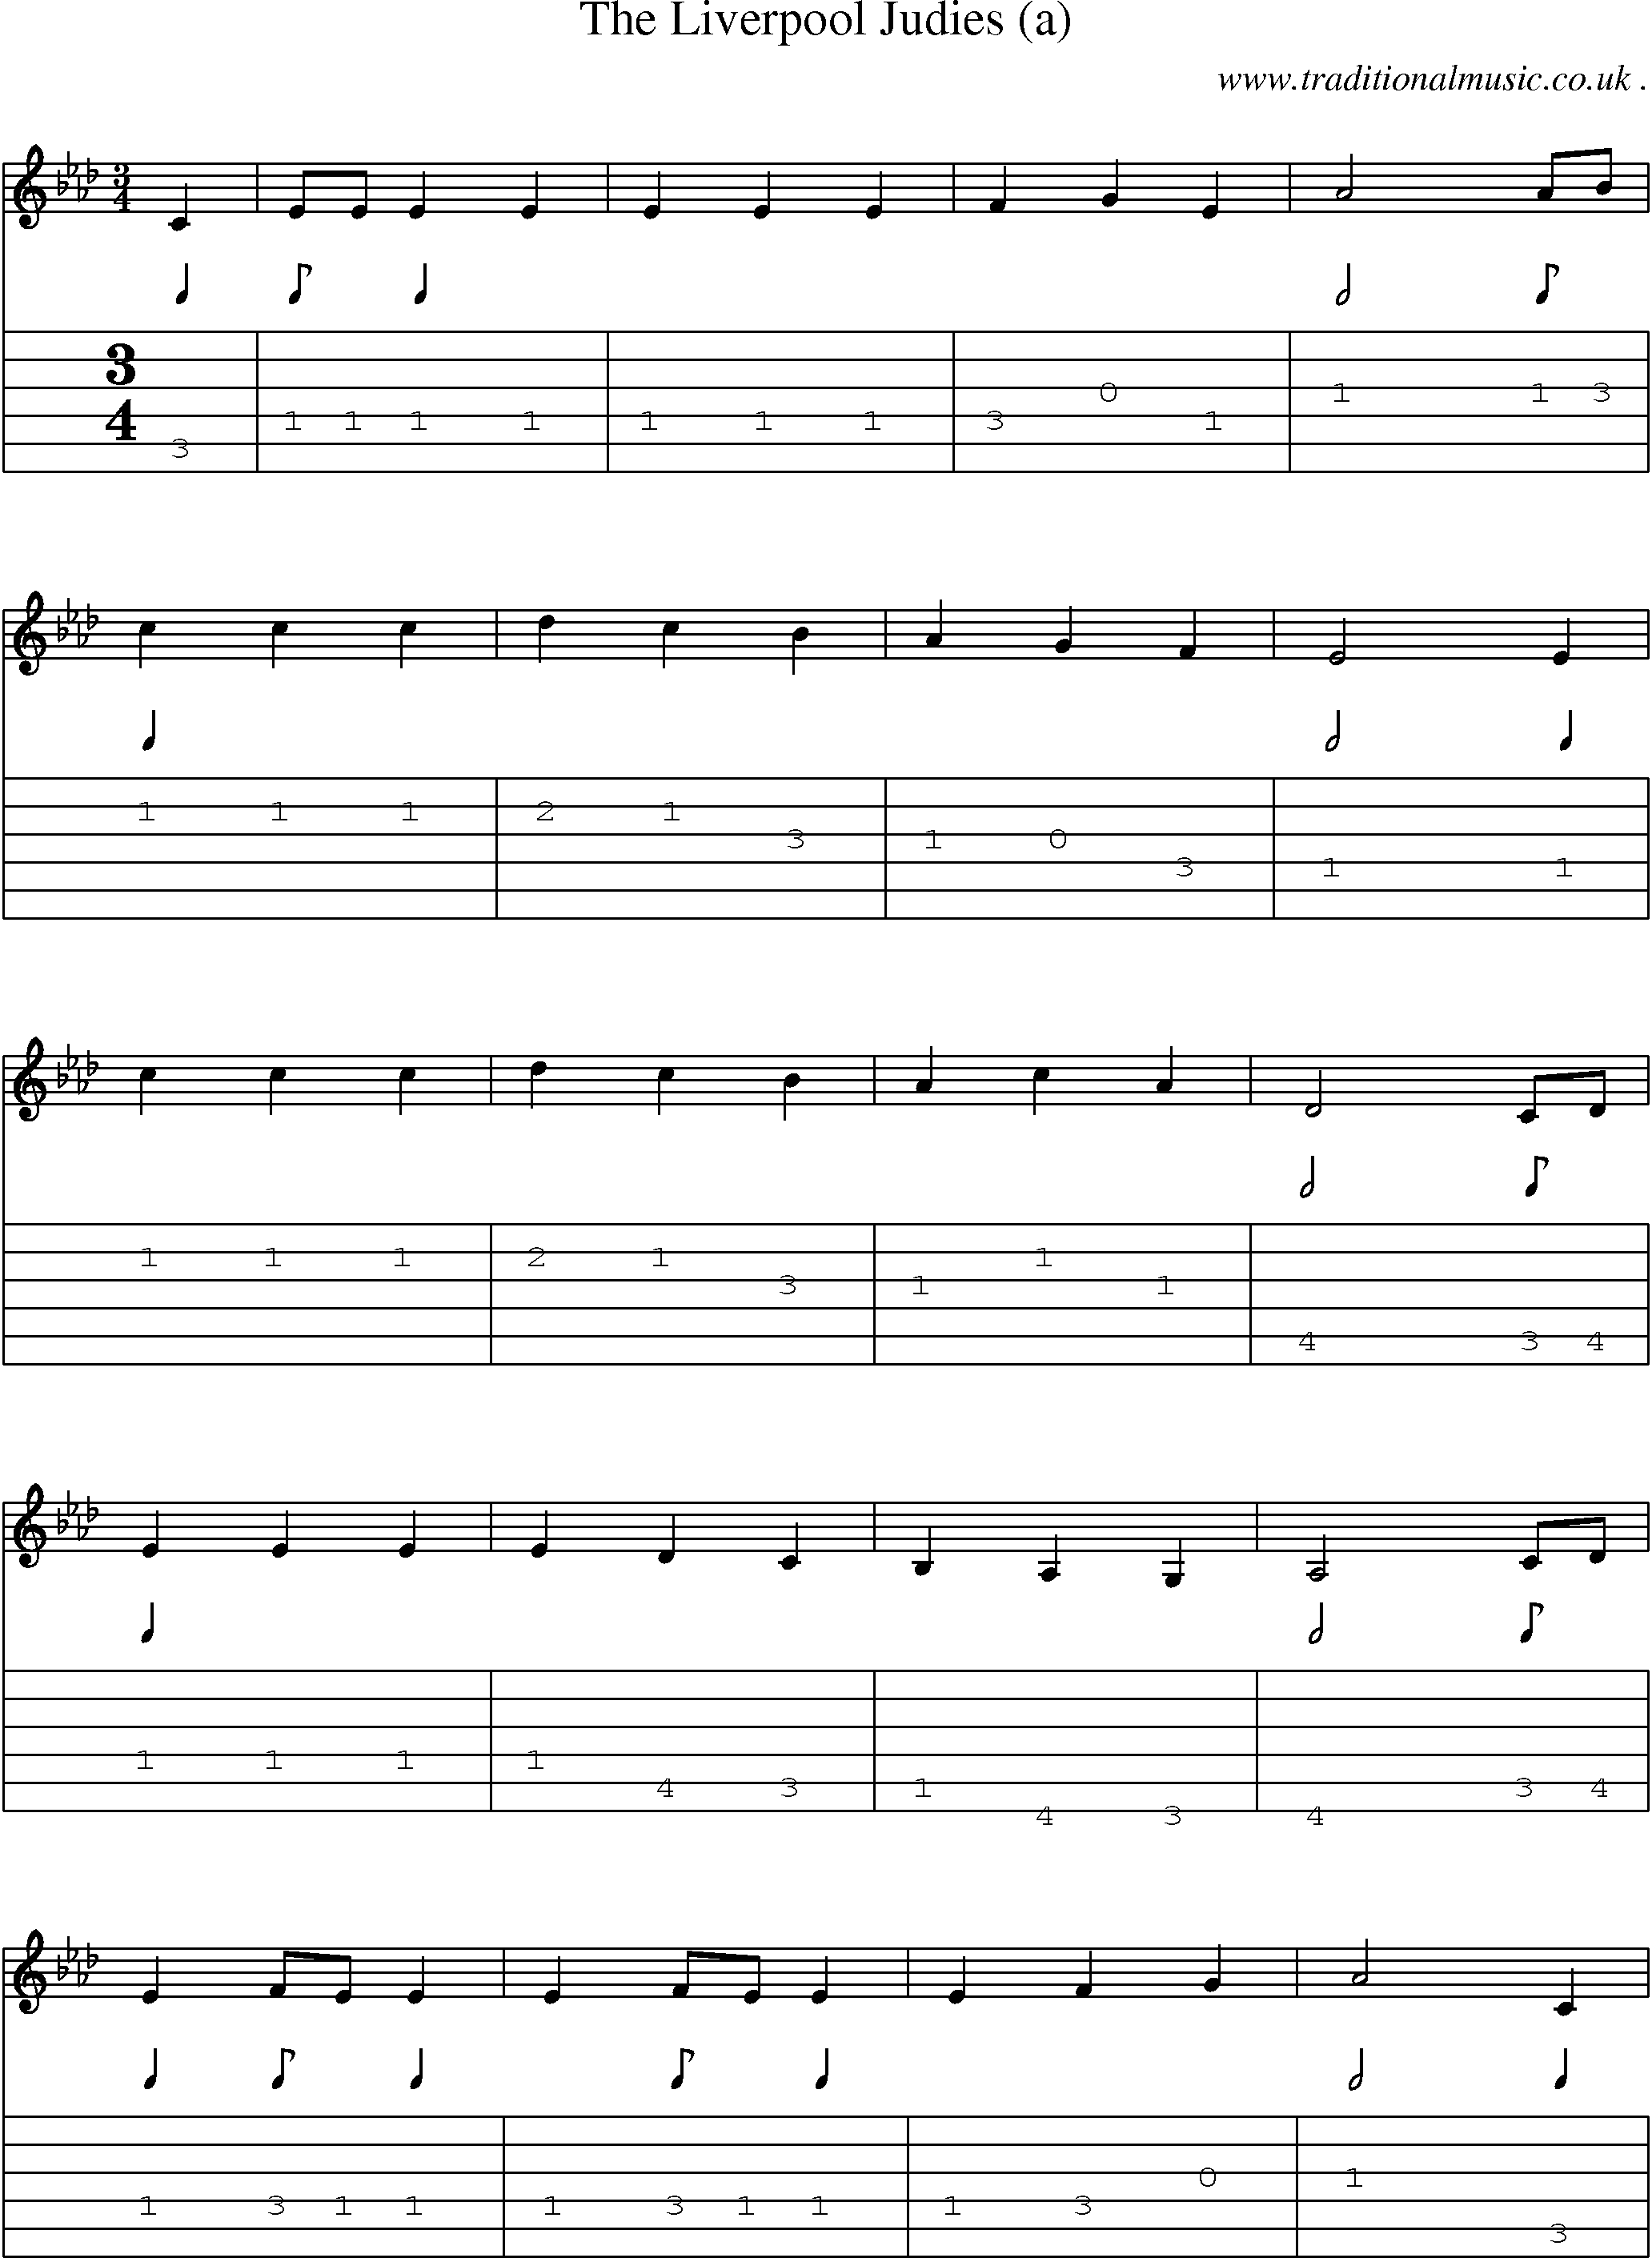 Sheet-Music and Guitar Tabs for The Liverpool Judies (a)